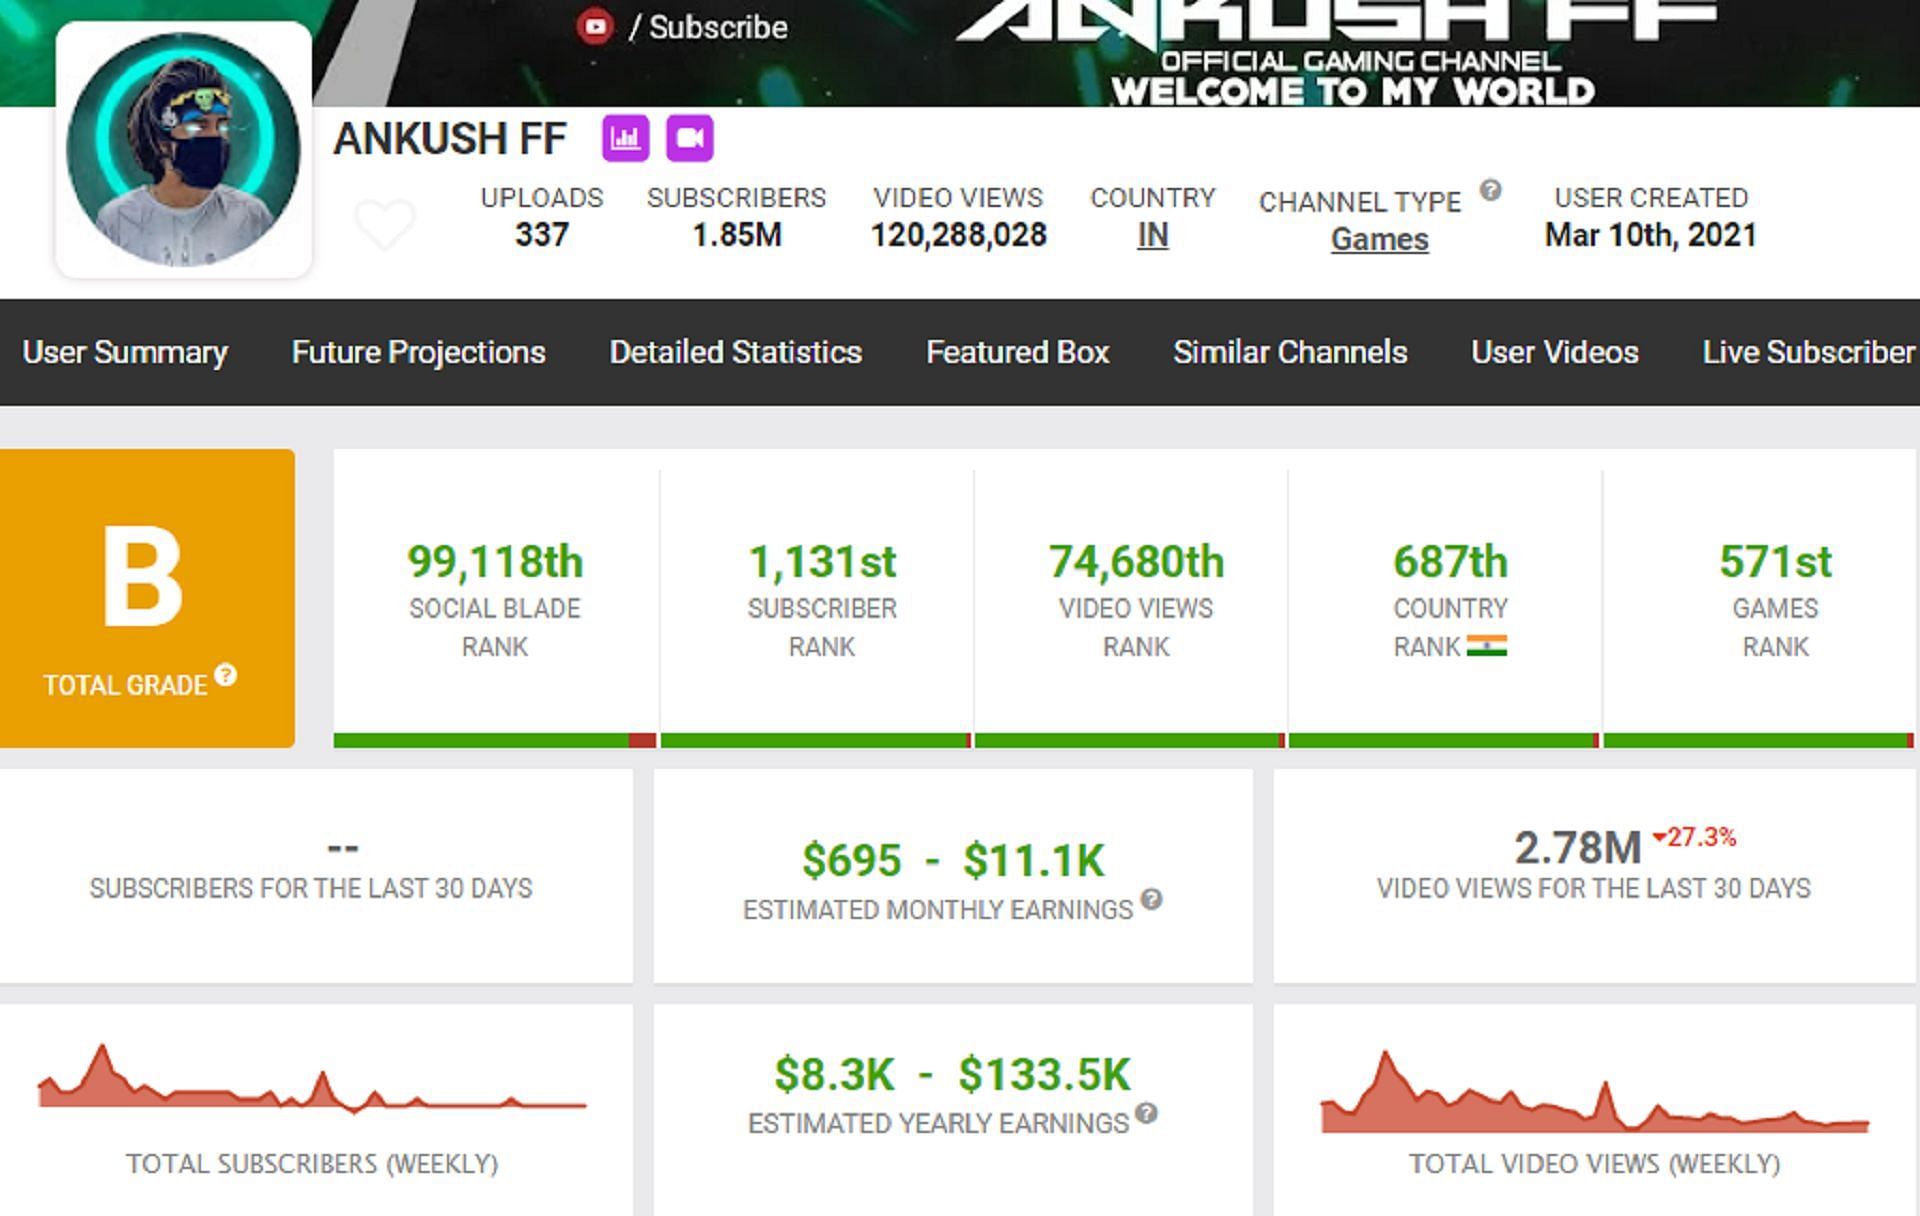 Details about the earnings of Ankush FF (Image via Garena)